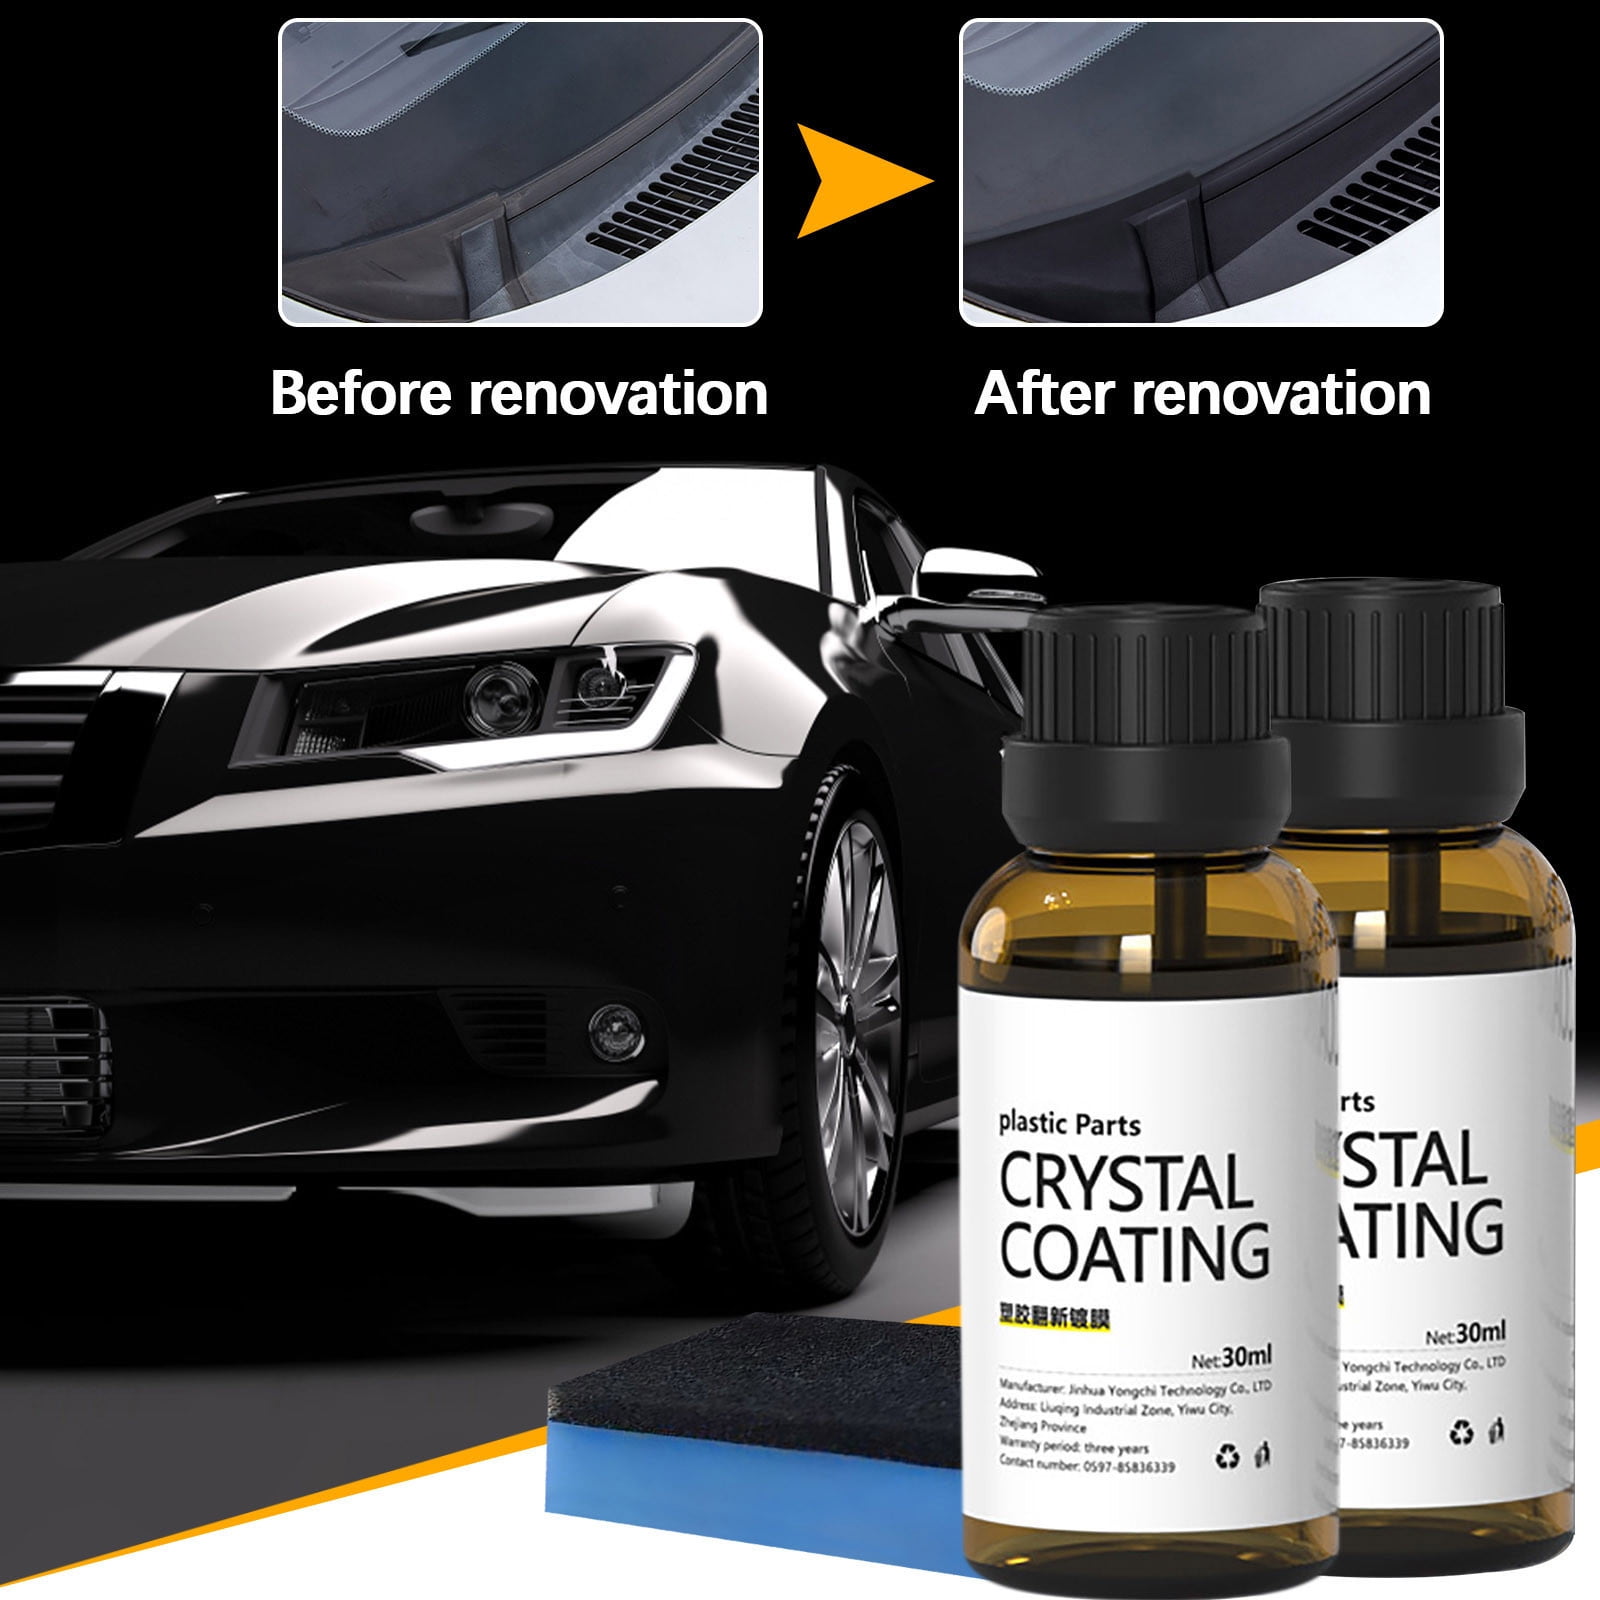 Ycolew Crystal Coating for Car Plastic Parts, Plastic Parts Crystal  Coating, Crystal Coating for Car, Easy to Use Car Refresher 